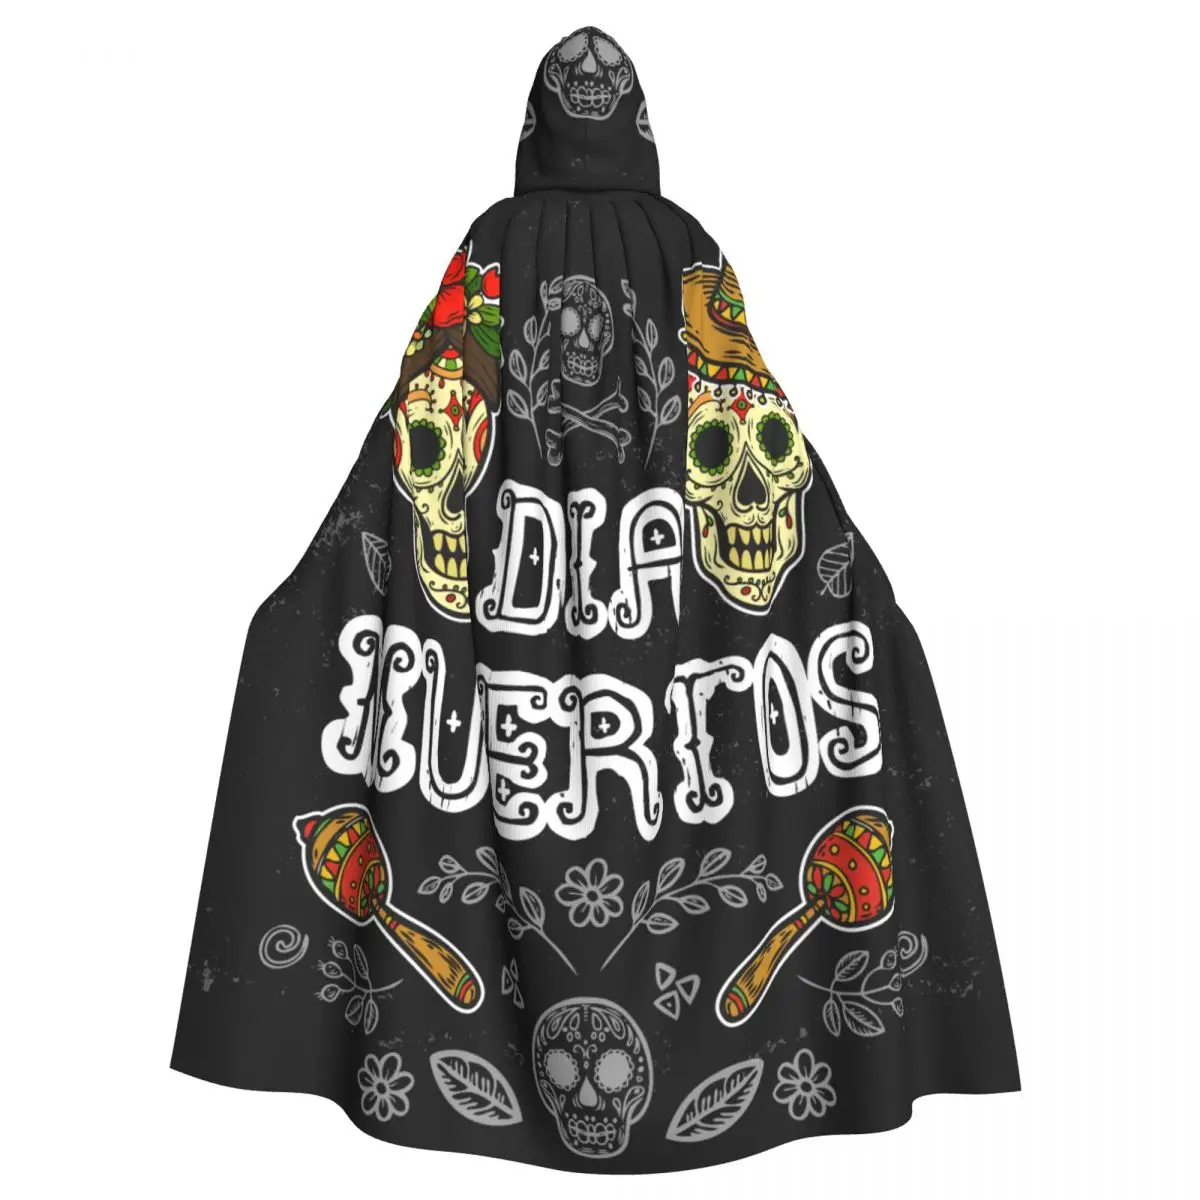 

Dia Muertos Mexican Day Of Dead Holiday Skull Adult Cloak Cape Hooded Medieval Costume Witch Wicca Elf Purim Carnival Party